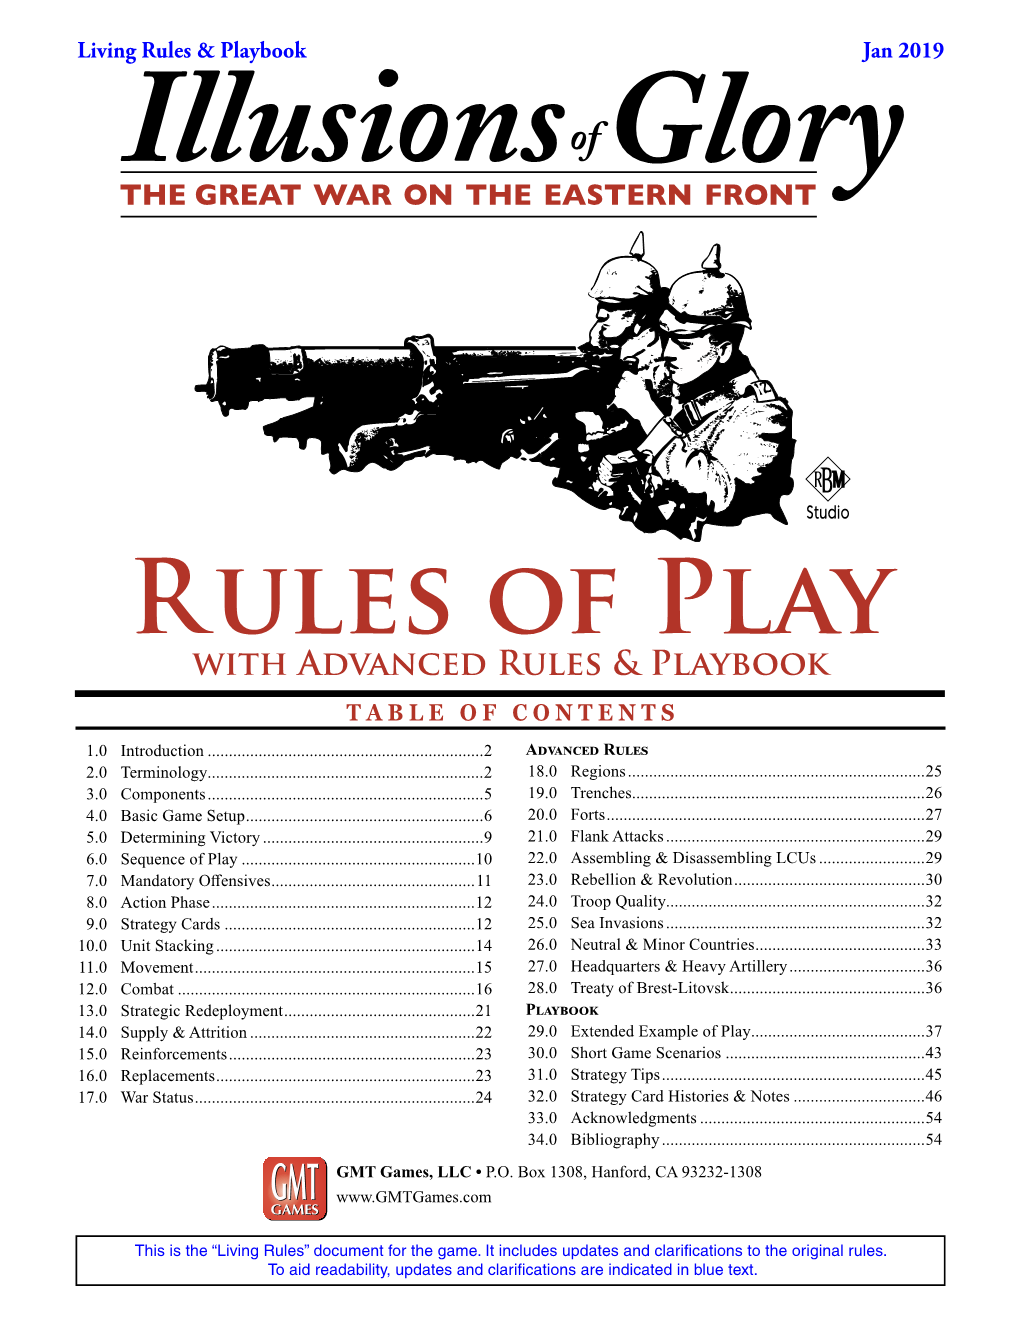 Rules of Play with Advanced Rules & Playbook T a B L E O F C O N T E N T S